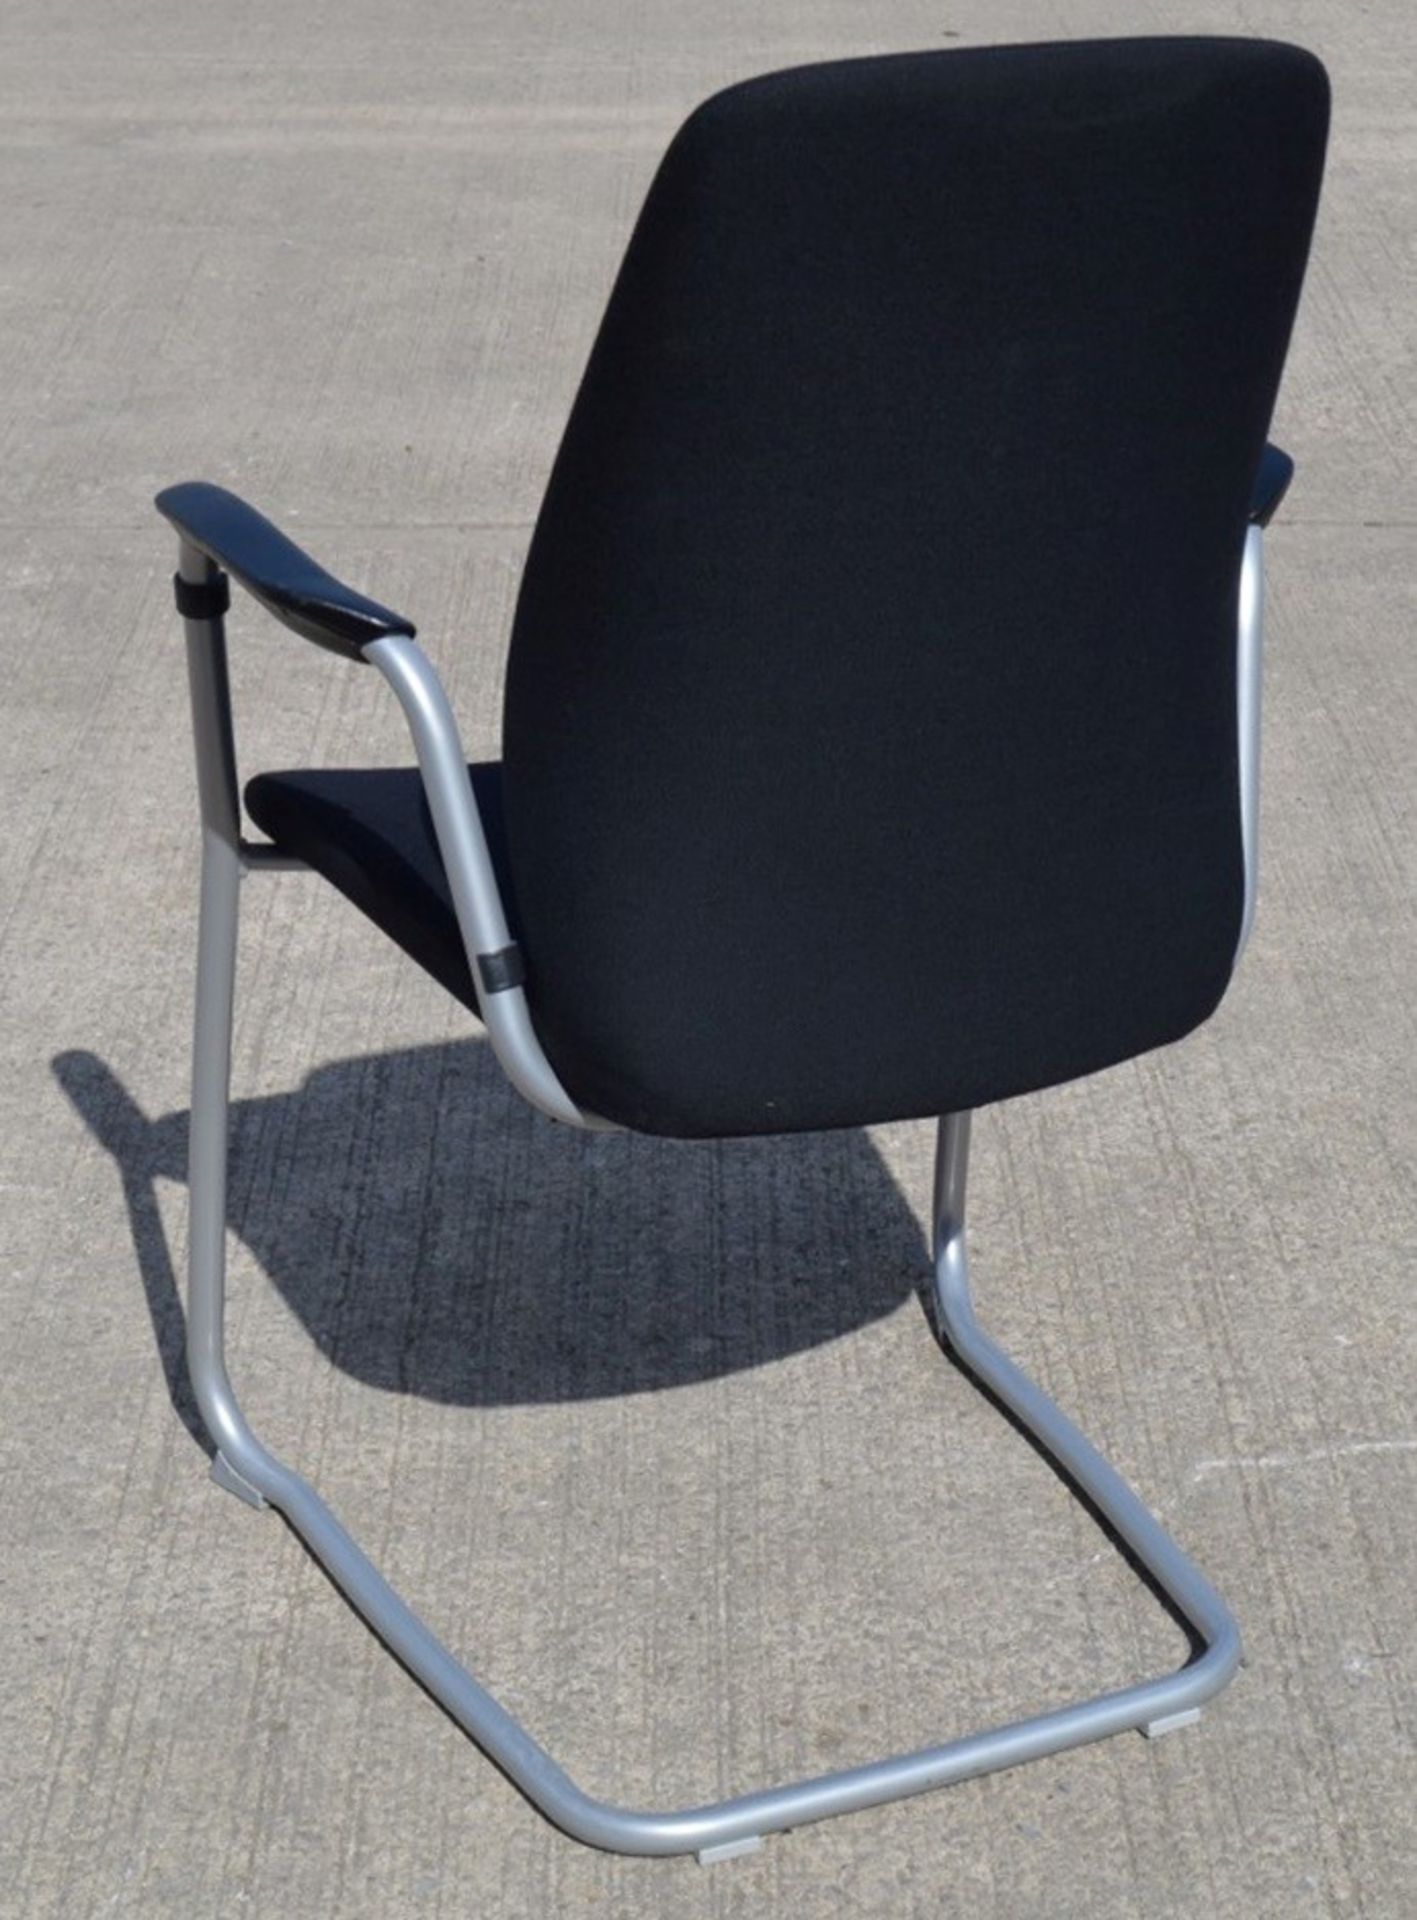 4 x Kinnarps 5000CV Meeting Chairs In Black - Dimensions: W59 x H92 x D53, Seat 45cm - Made In - Image 6 of 7